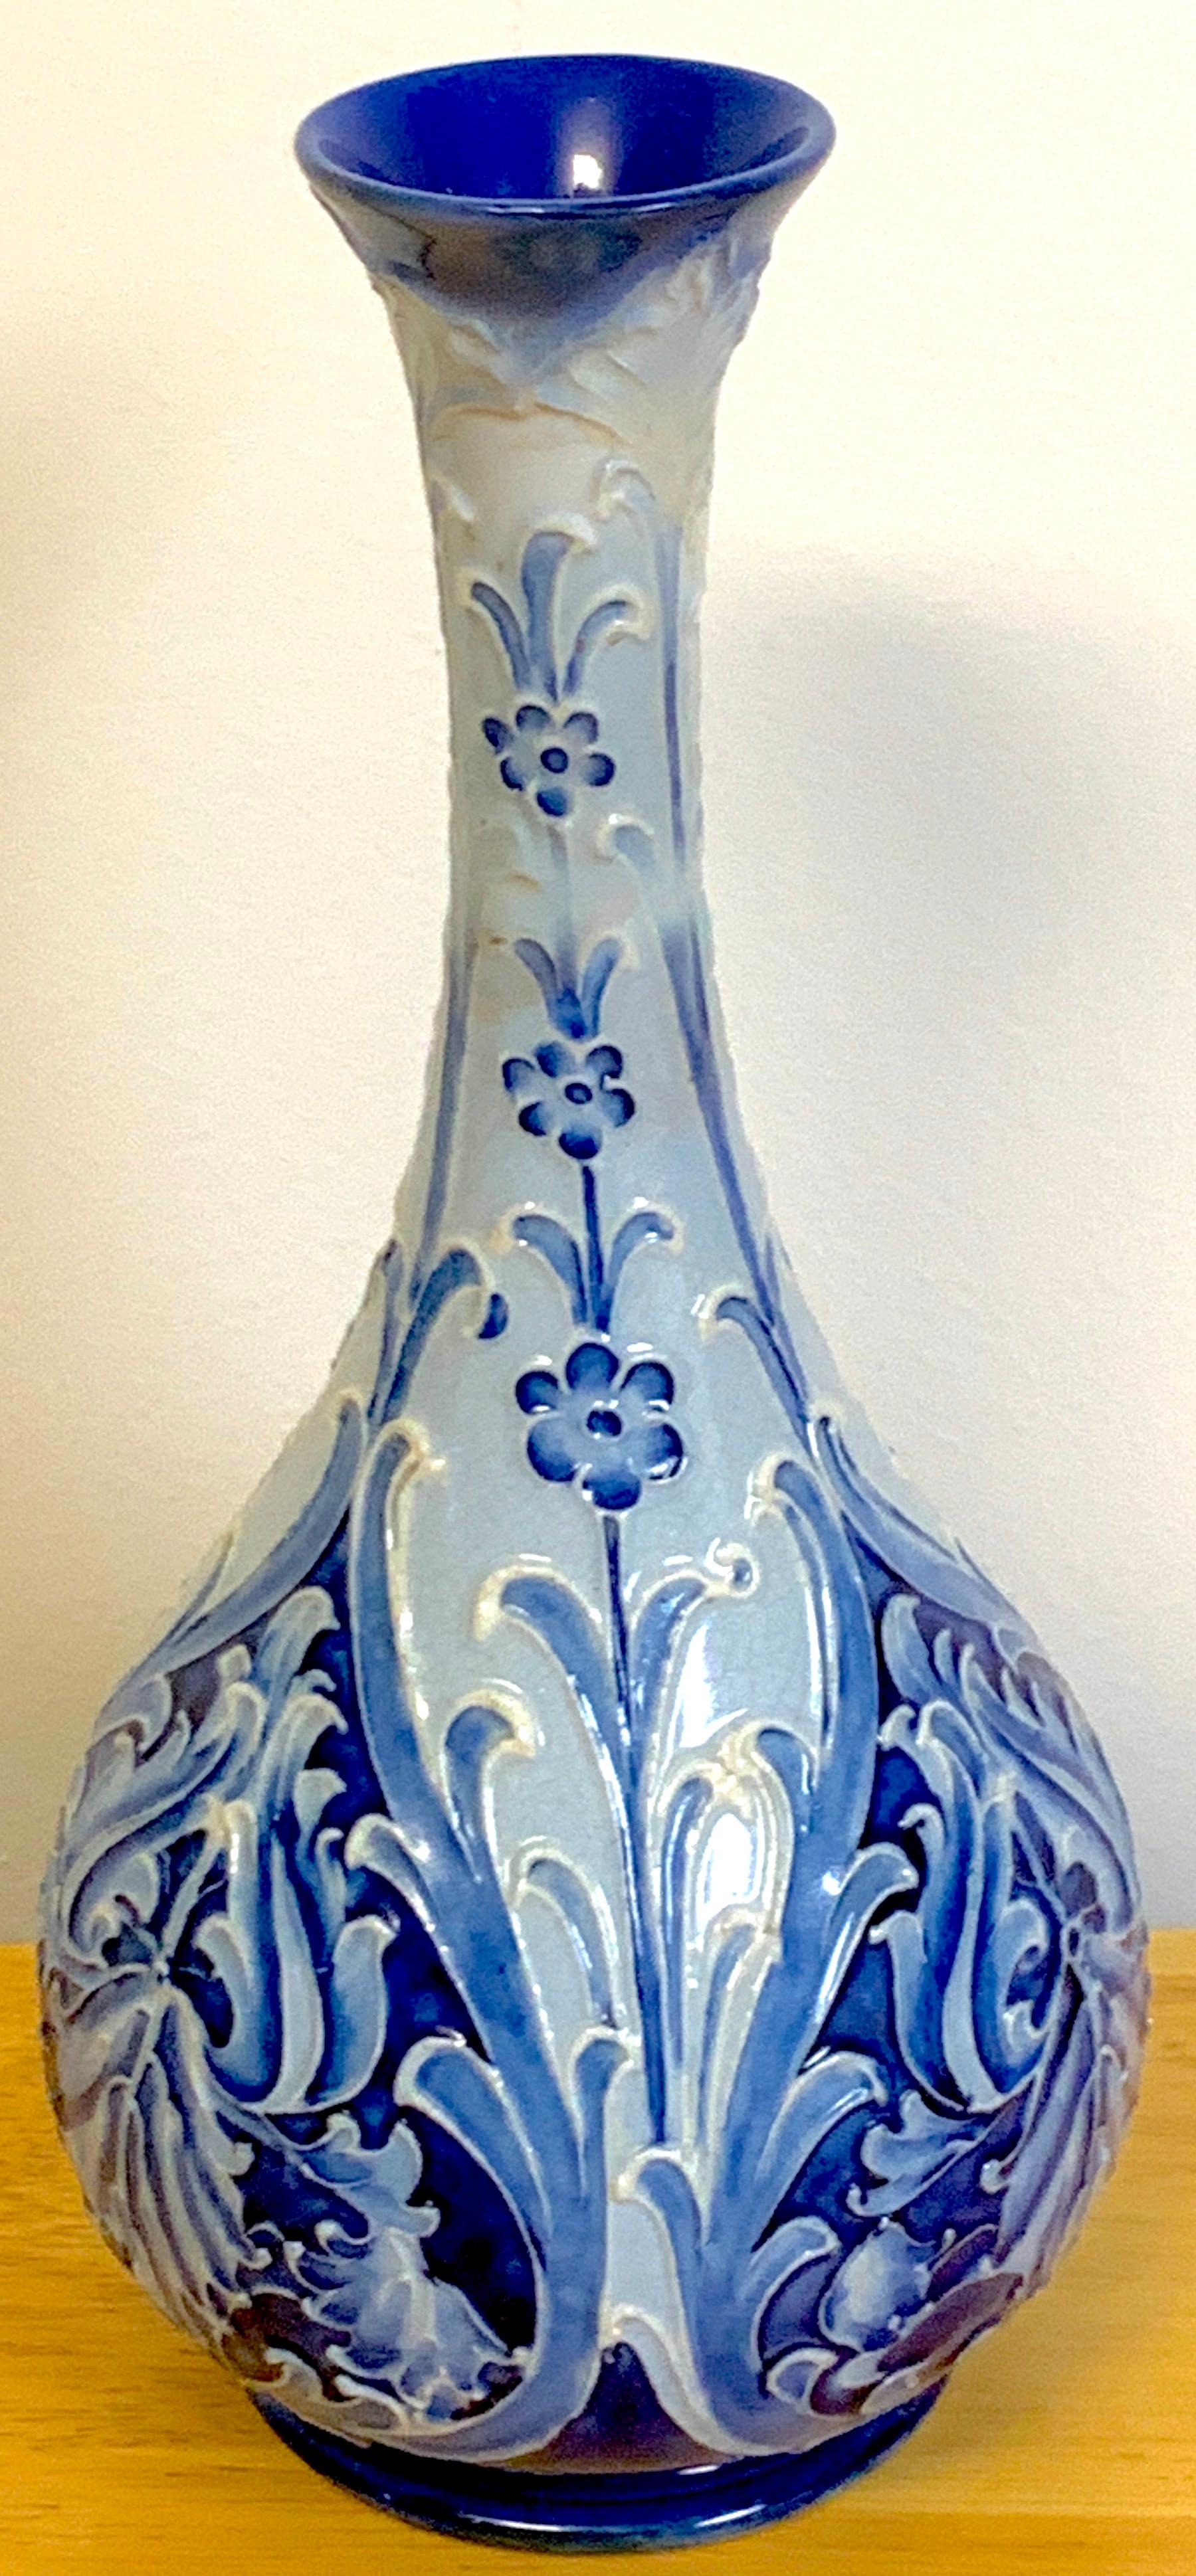 Florian ware, Art Nouveau long neck vase by William Moorcroft, a fine example, bright well executed decoration, signed in full with the Macintyre stamp plus Moorcroft’s initials incised as the designer - ‘W.M des’.


 